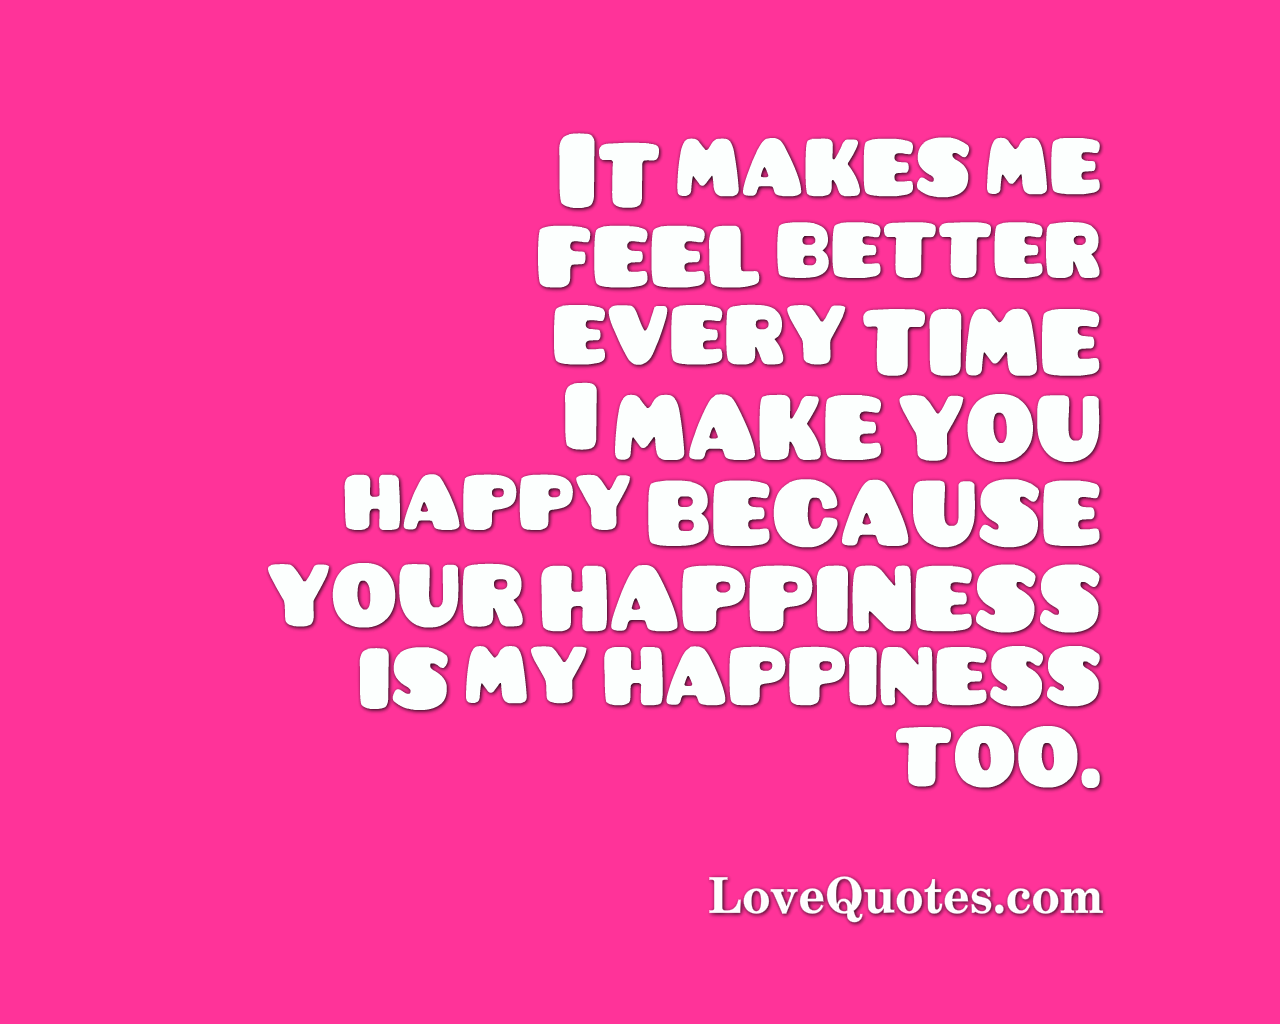 You're My Happiness - Love Quotes